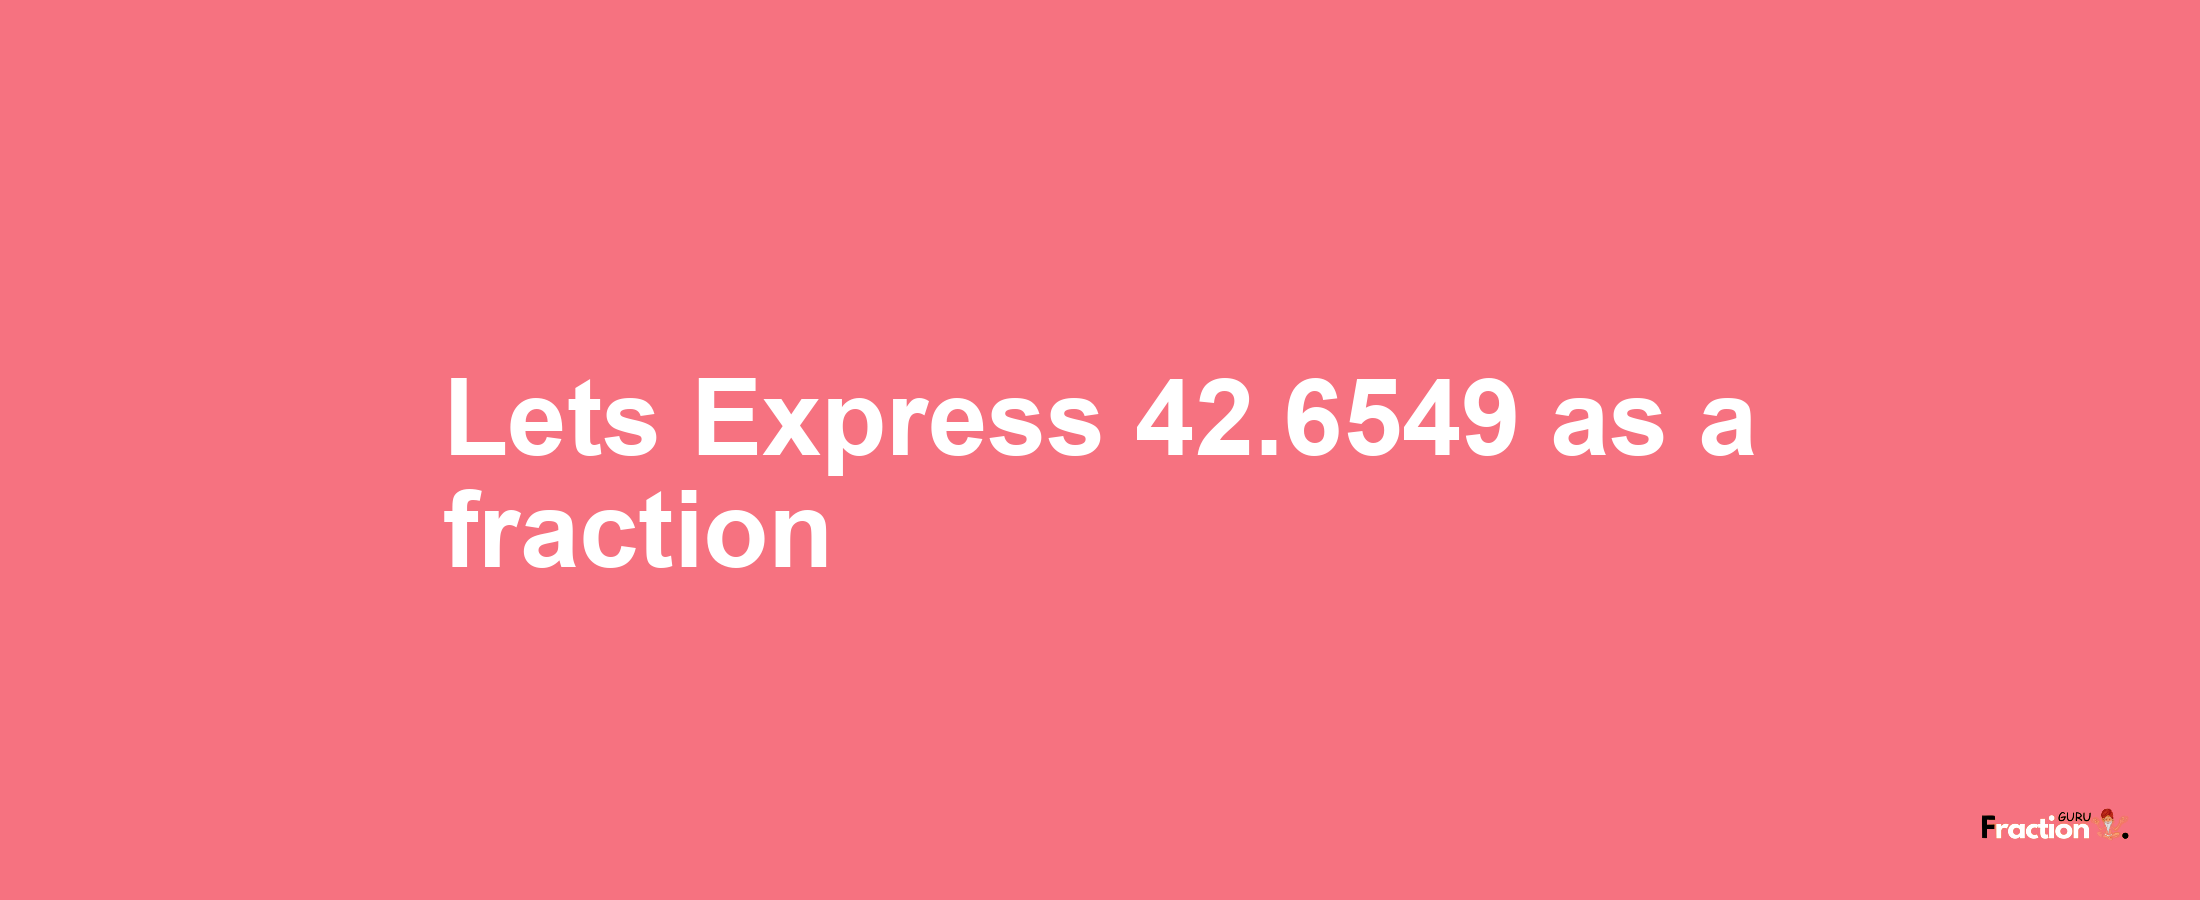 Lets Express 42.6549 as afraction